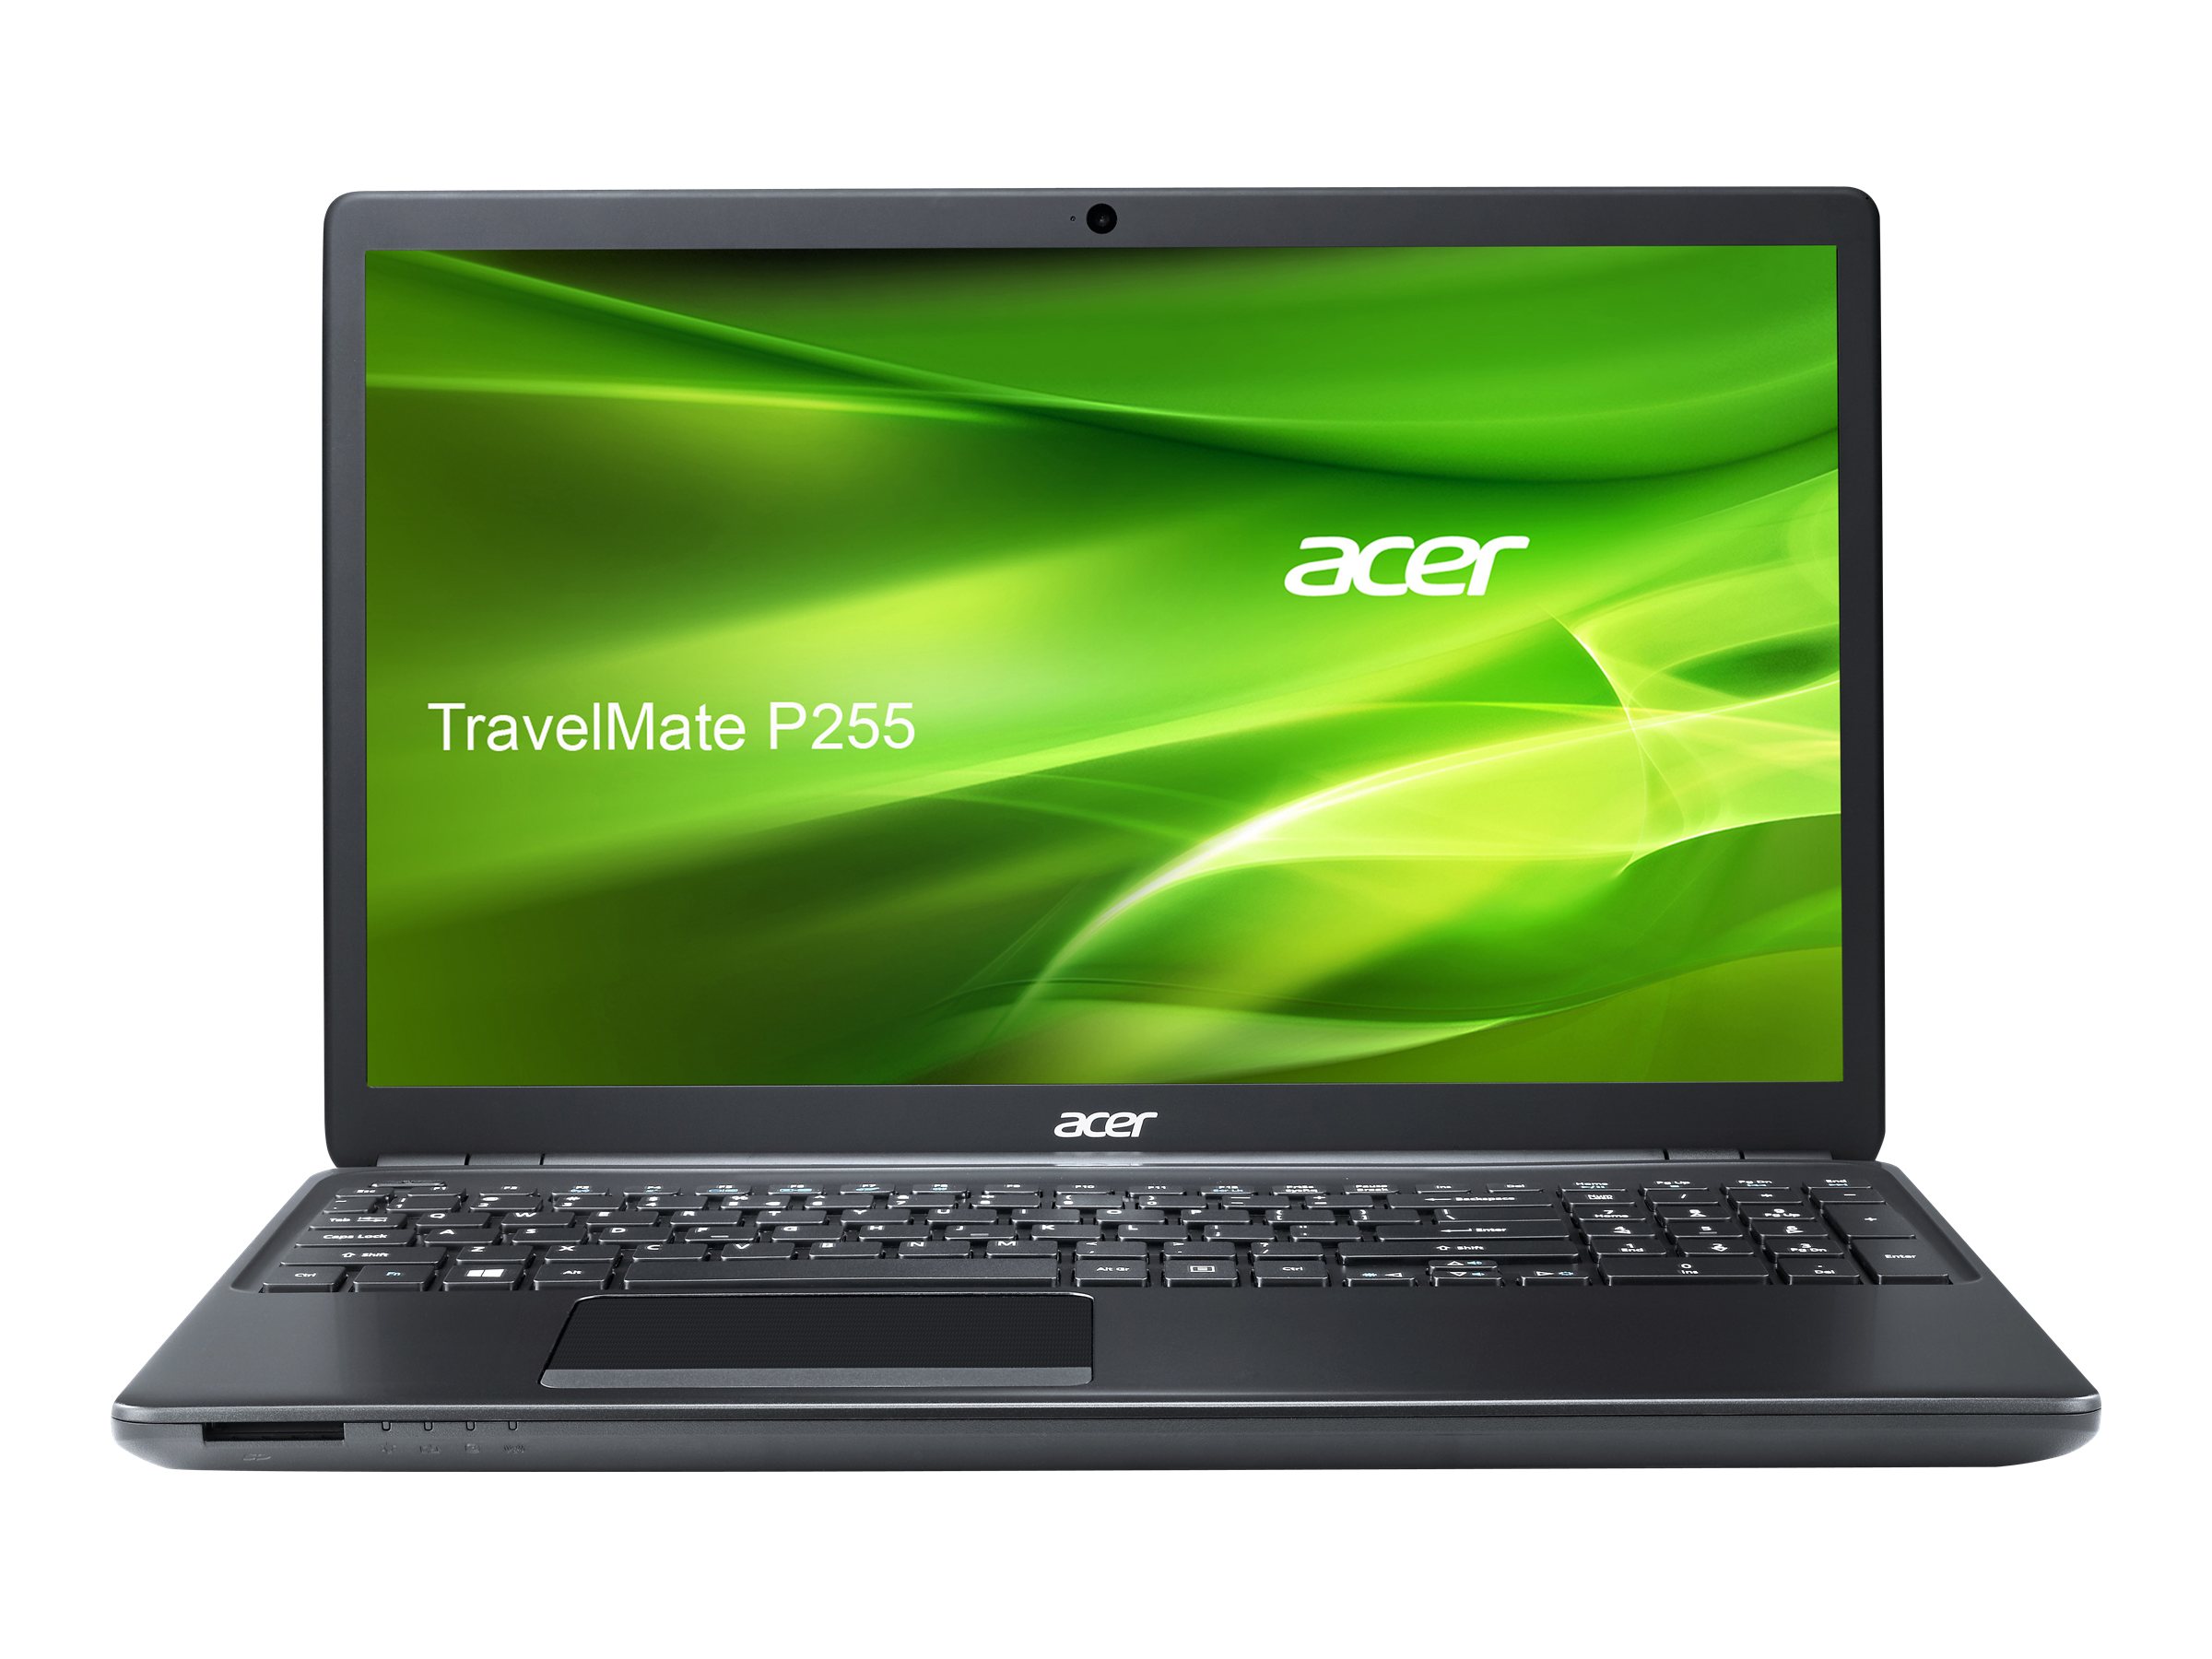 Acer TravelMate P455 (M) - full specs, details and review